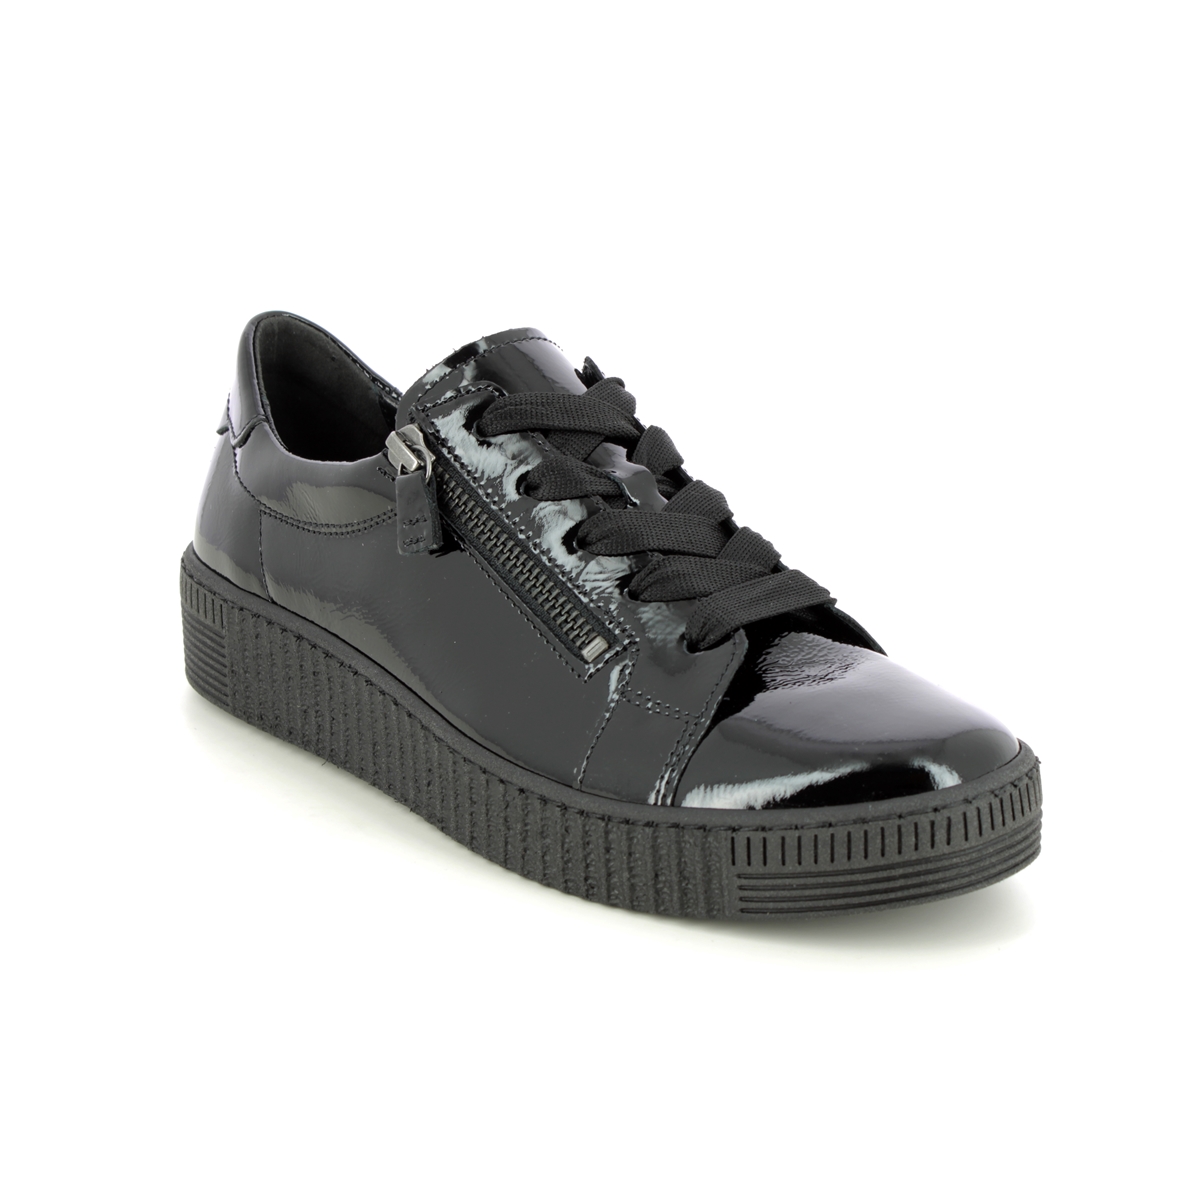 Gabor Wisdom Black Patent Womens Trainers 93.334.97 In Size 3 In Plain Black Patent  Womens Trainers In Soft Black Patent Leather